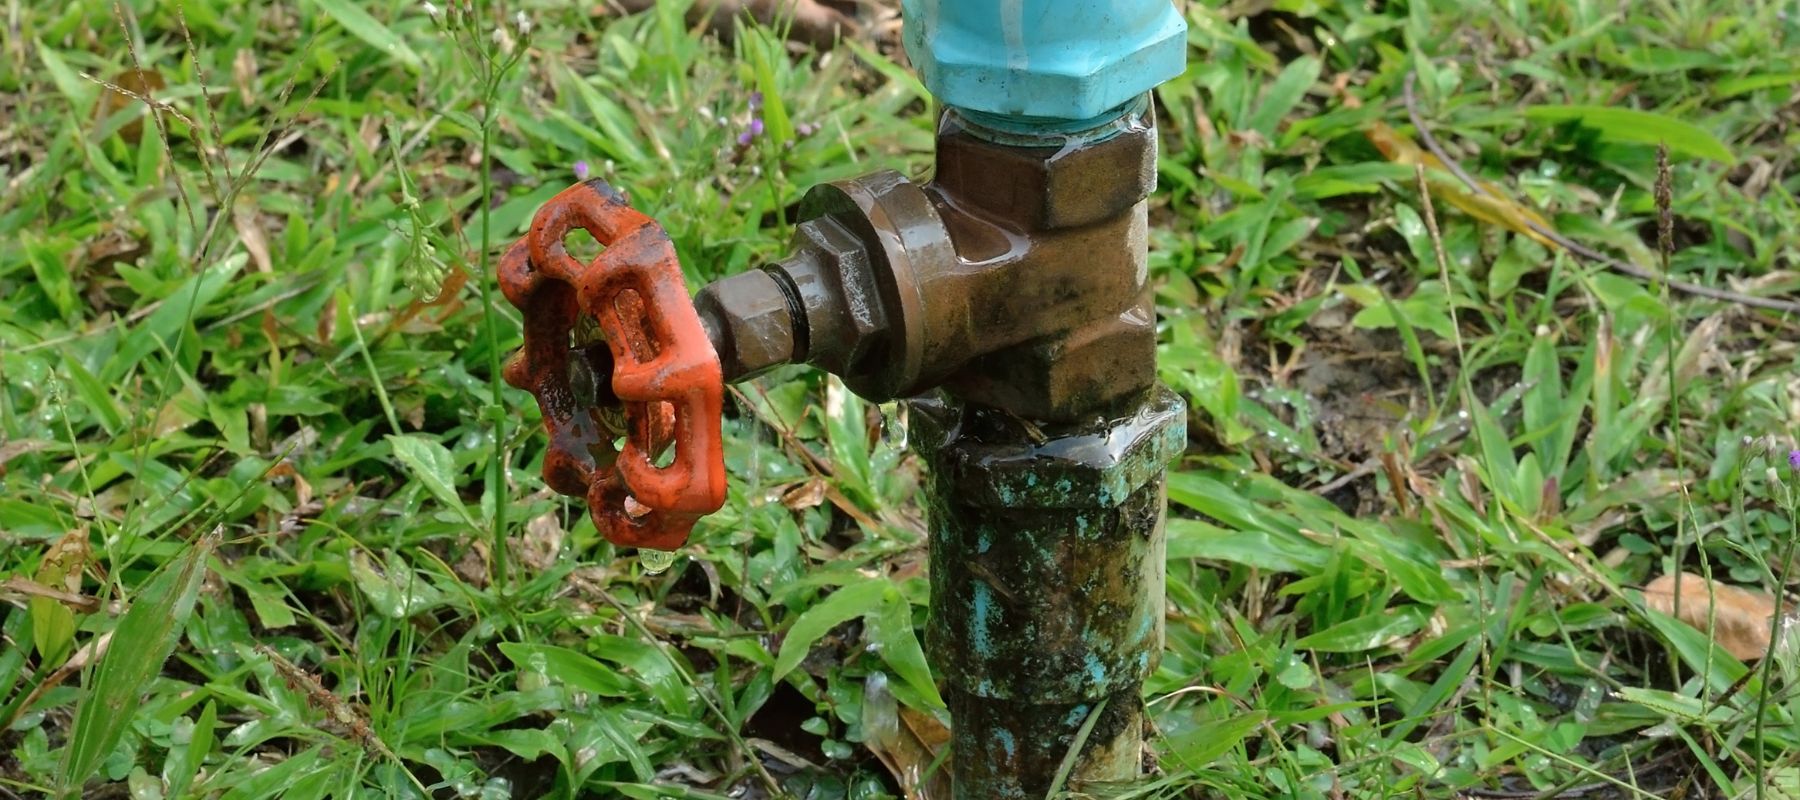 close up of water spigot with red handle in a yard